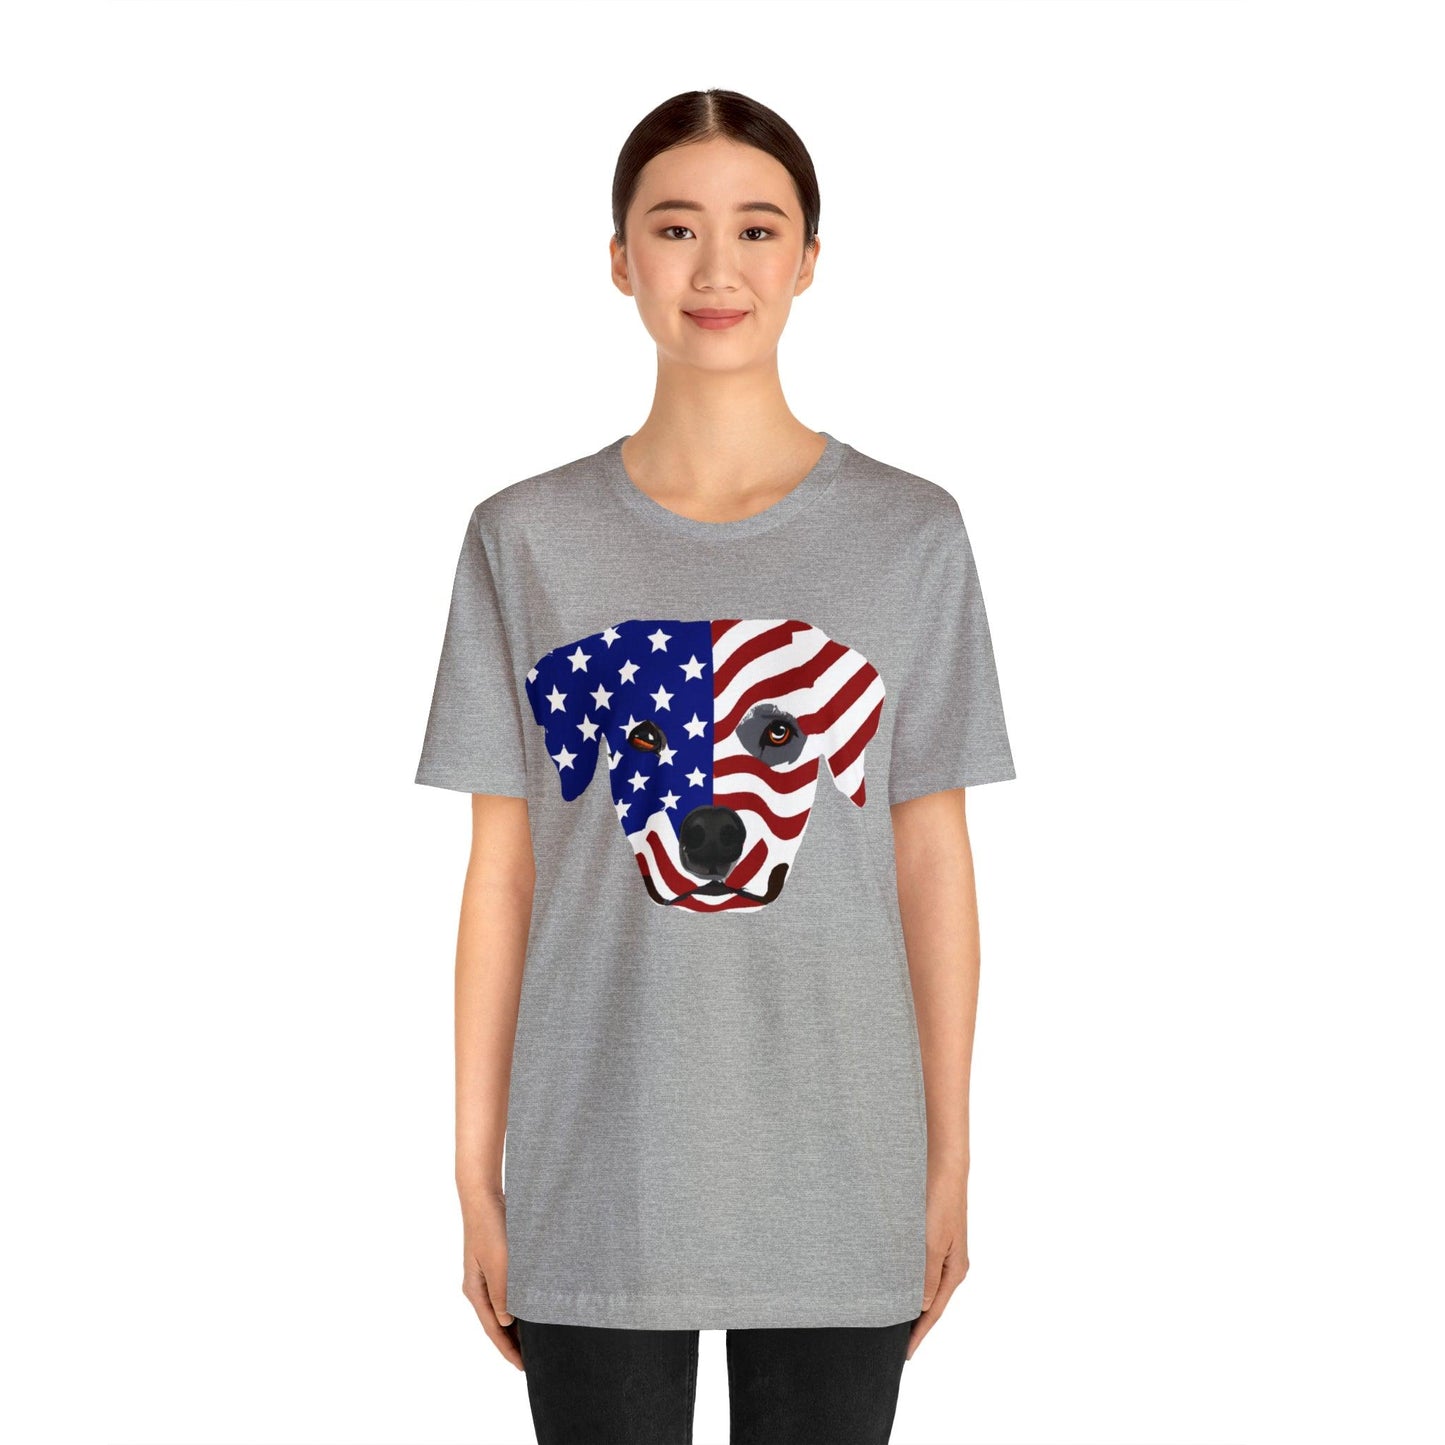 Express Your Patriotism and Love of Dogs with Dog Flag shirt: Independence Day, Fireworks, Freedom - Perfect for Women and Men